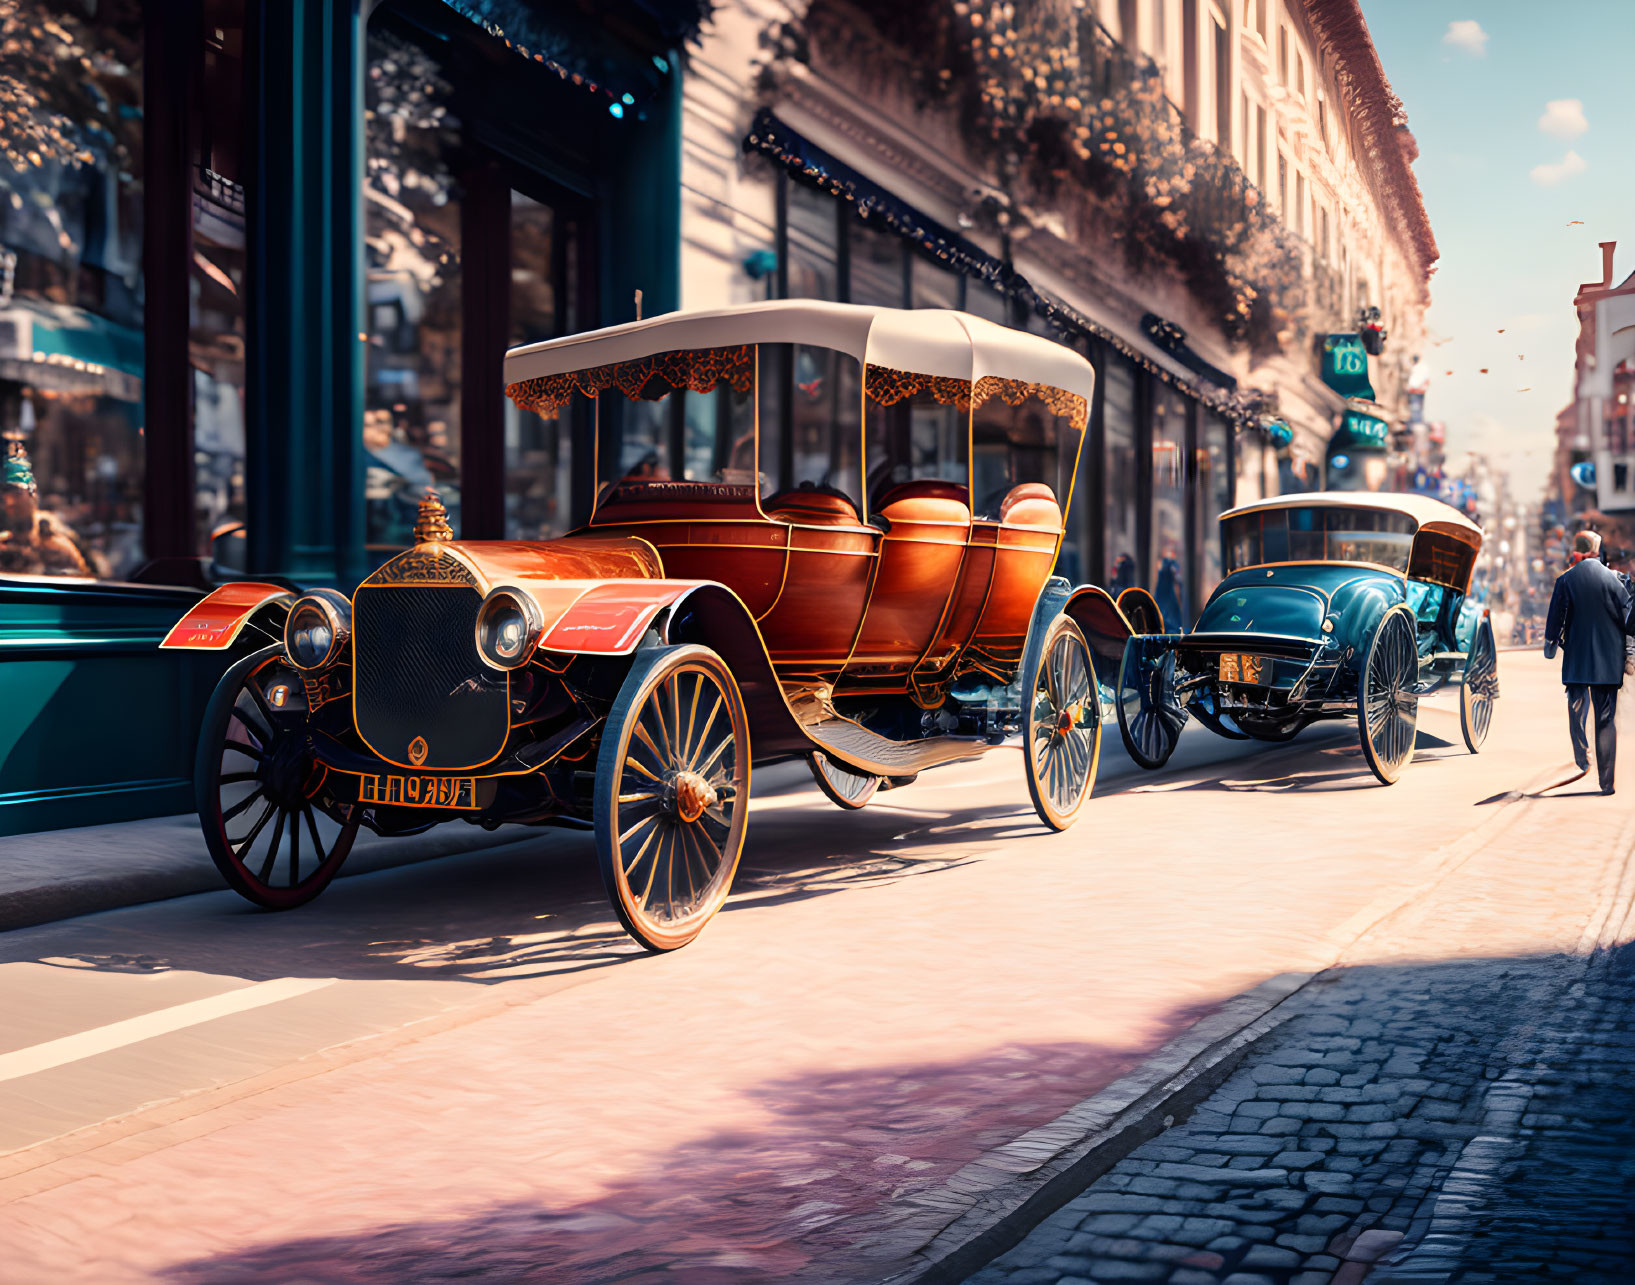 Vintage Cars on Sunny City Street with Cobblestones and Modern Buildings